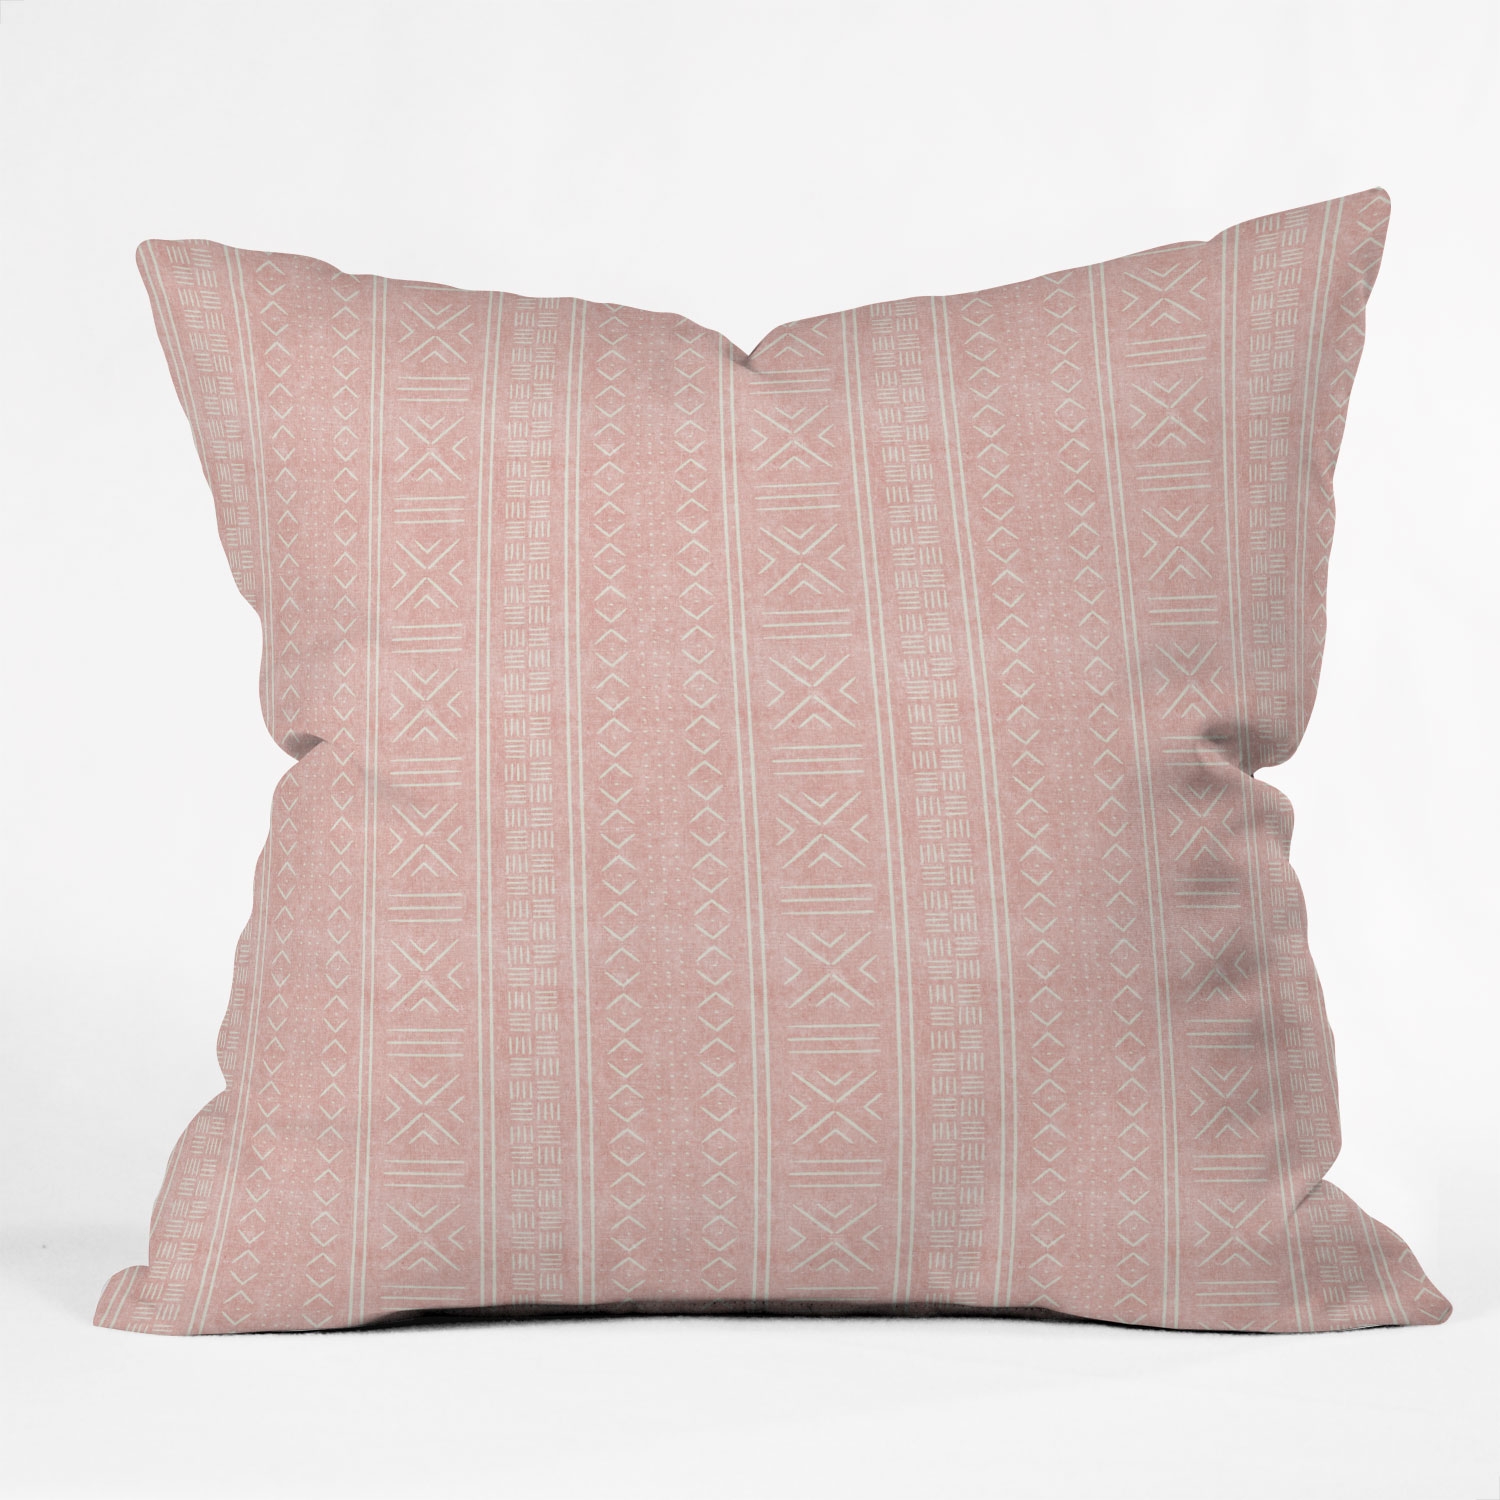 Pink Mudcloth Tribal by Little Arrow Design Co - Outdoor Throw Pillow 16" x 16" - Image 1